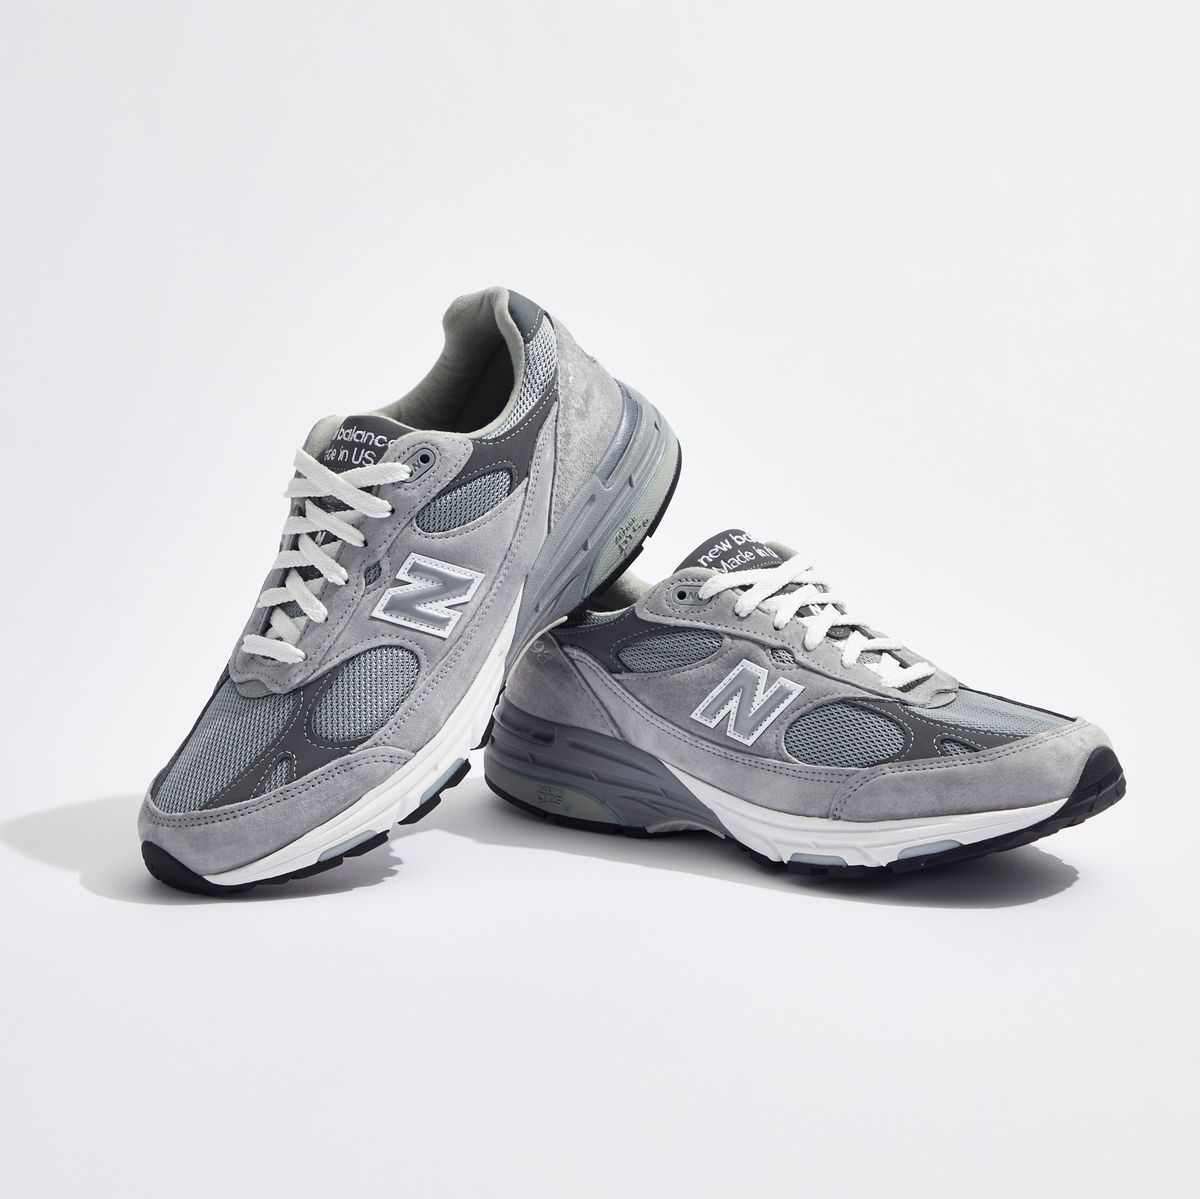 New Balance Made in US Sneaker Price Where Buy